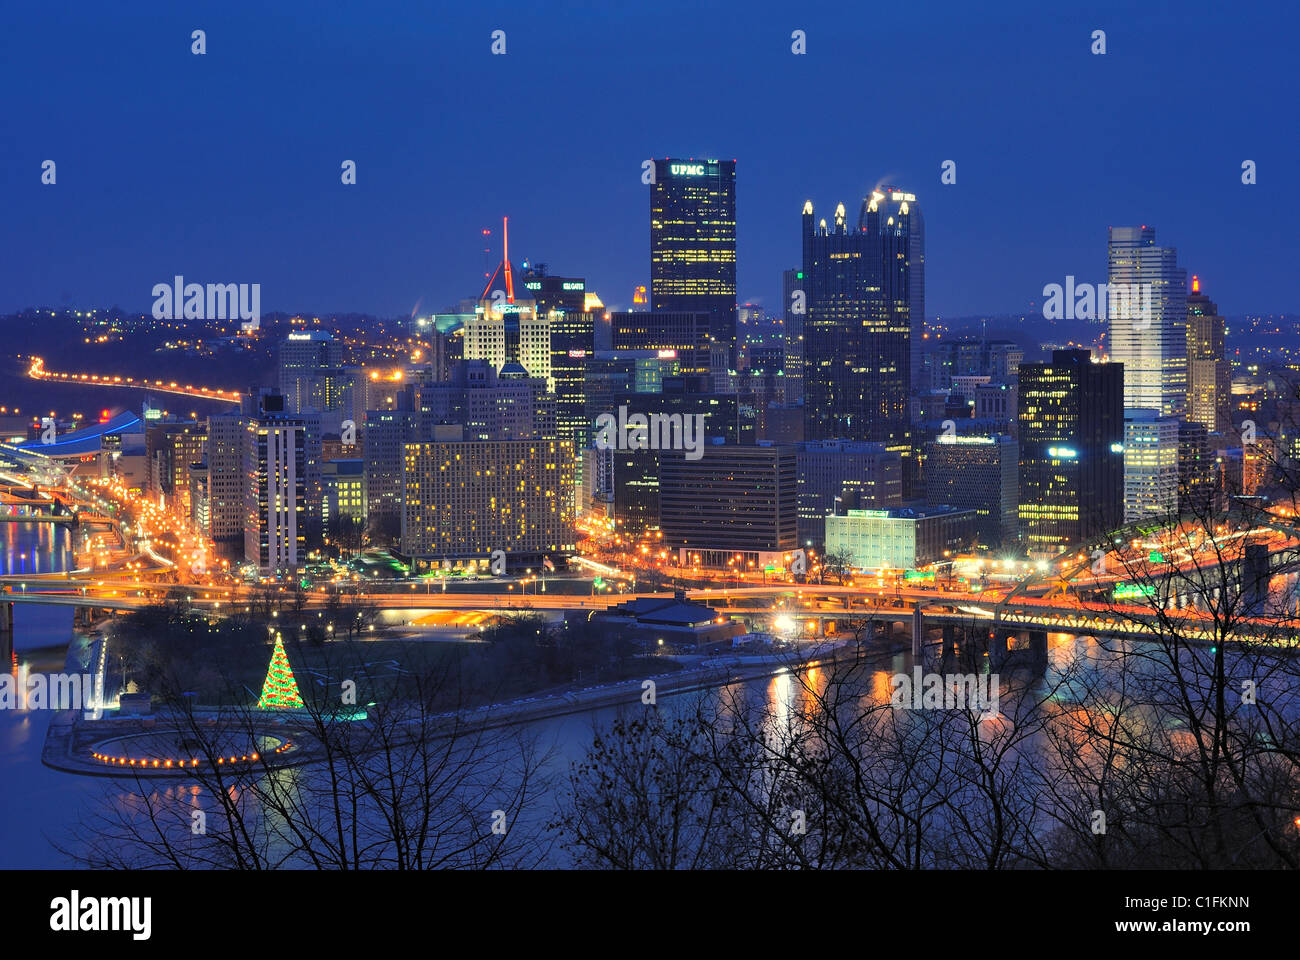 The skyline of Pittsburgh, Pennsylvania, with corporate signs visible atop skyscrapers, visible from Mt. Washington. Stock Photo